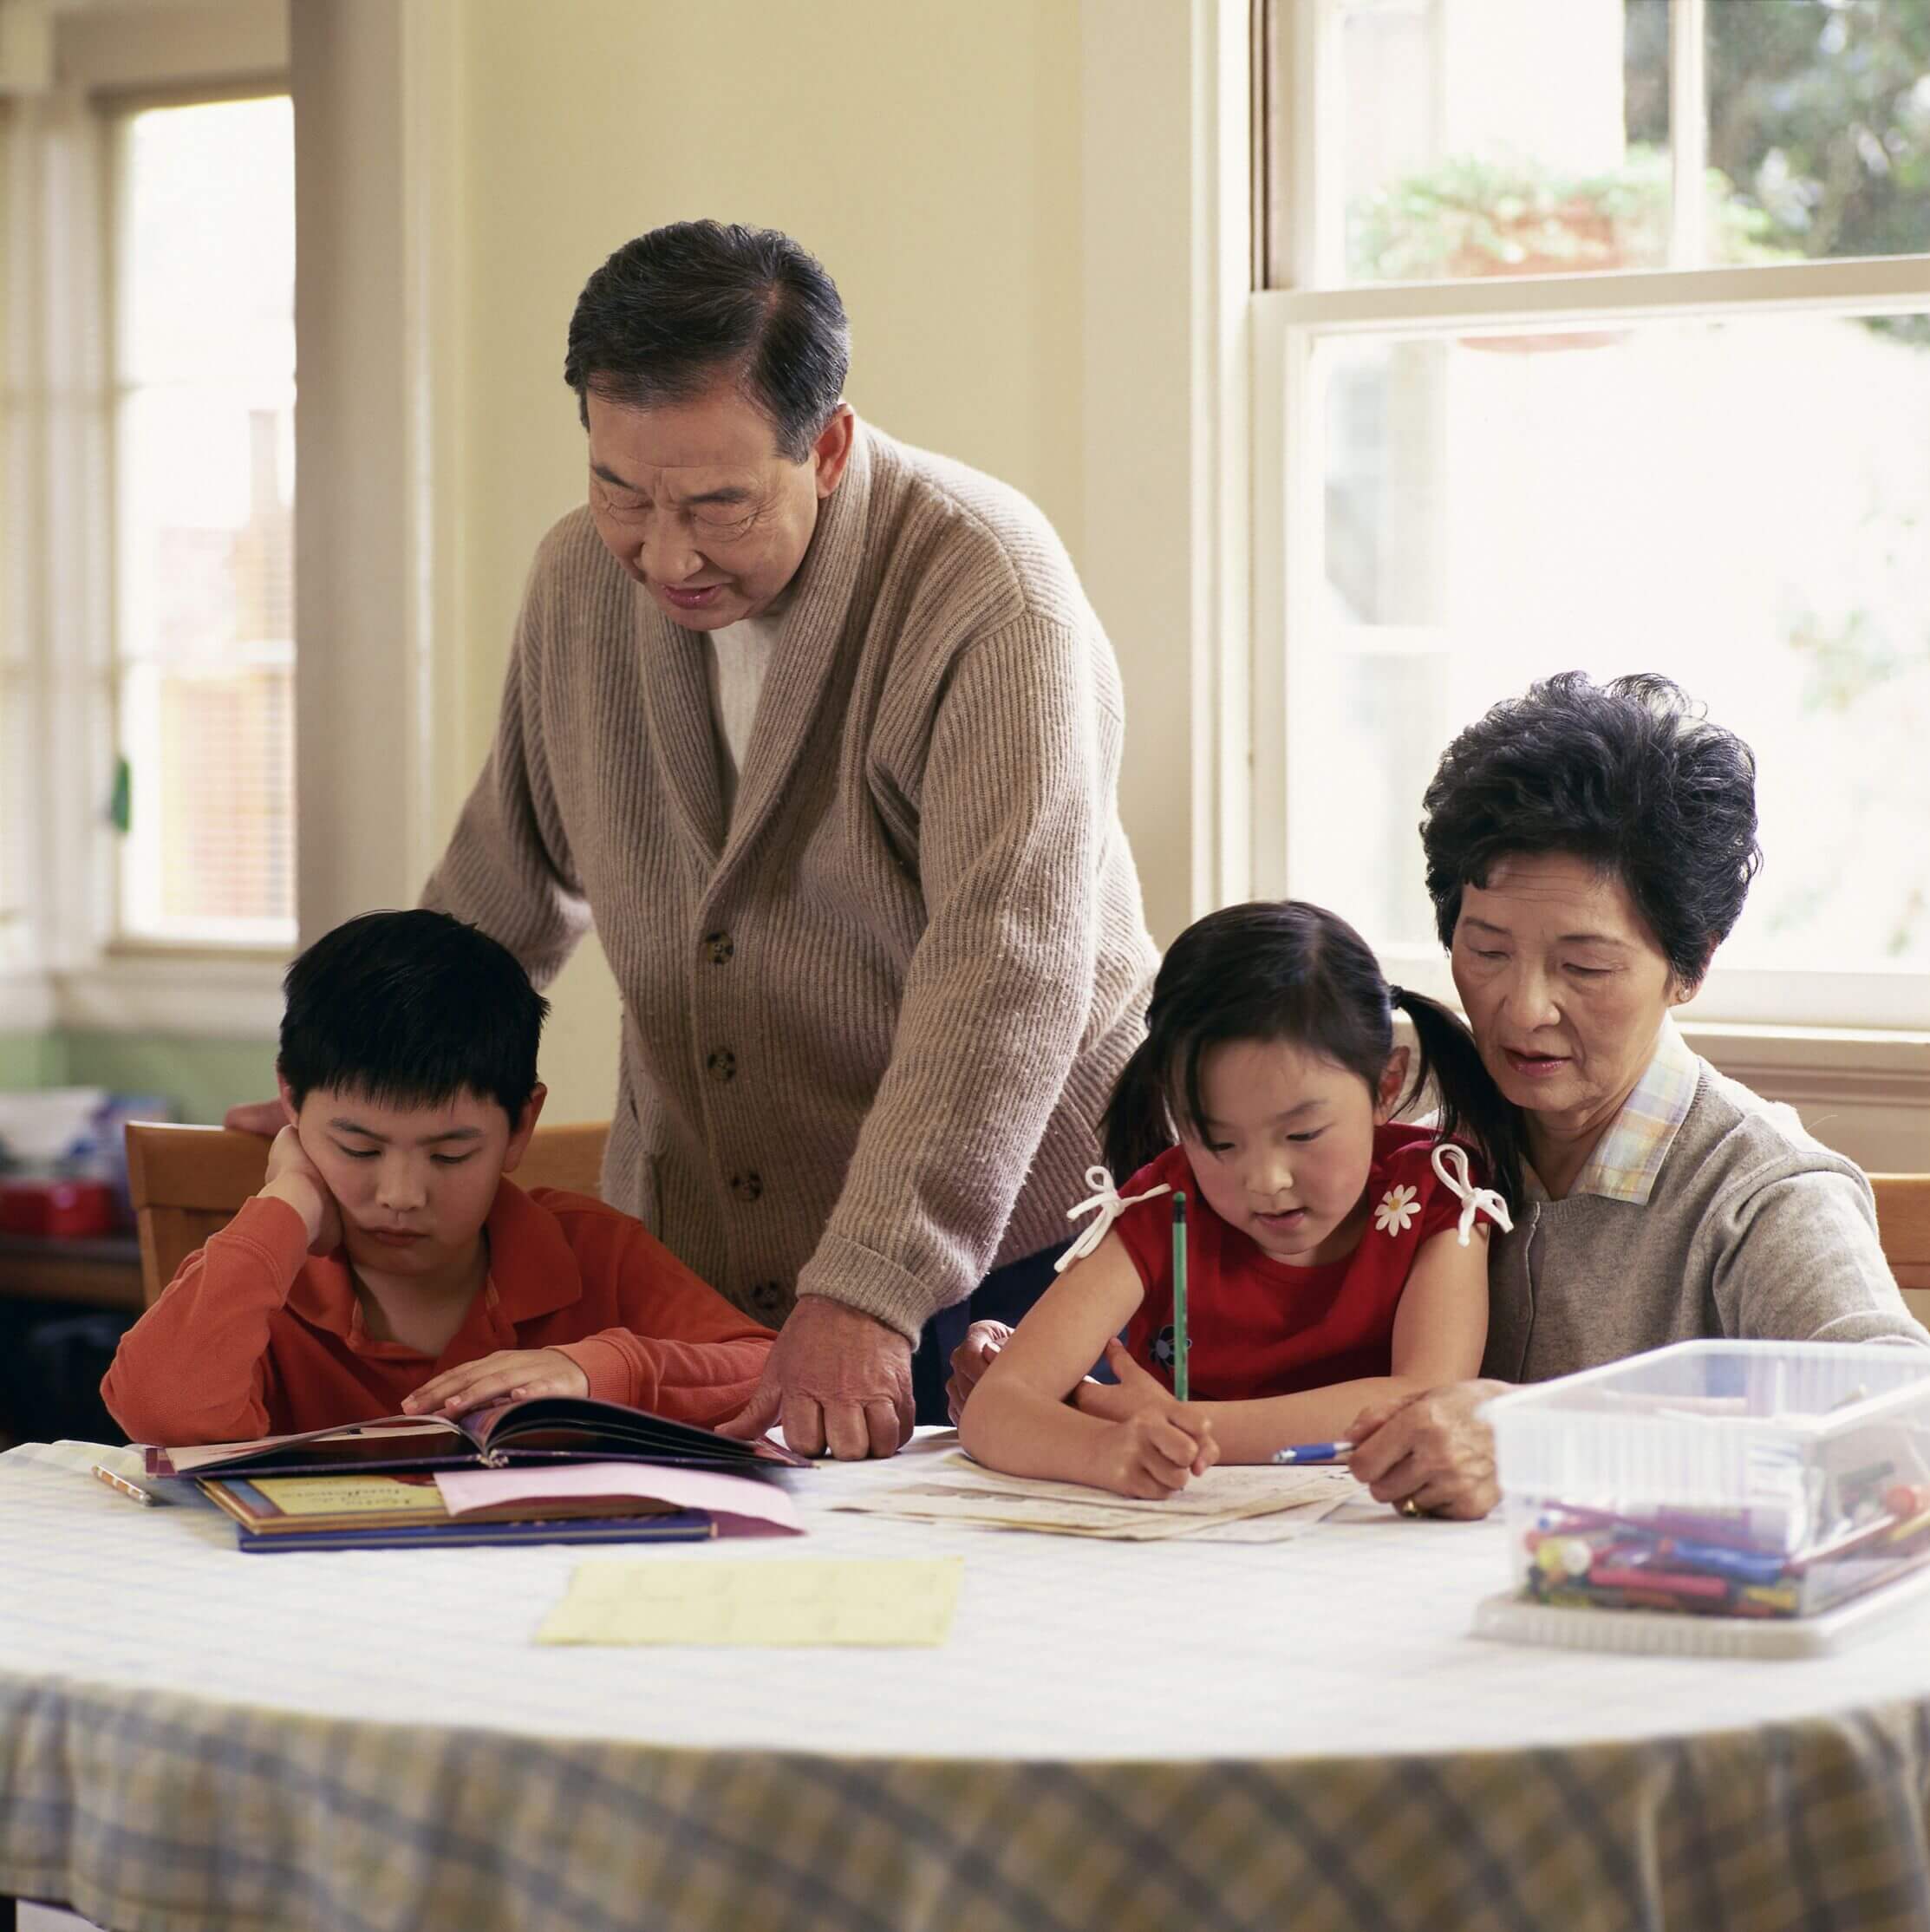 grandparents and grandchildren learning at home - benefits of homeschooling